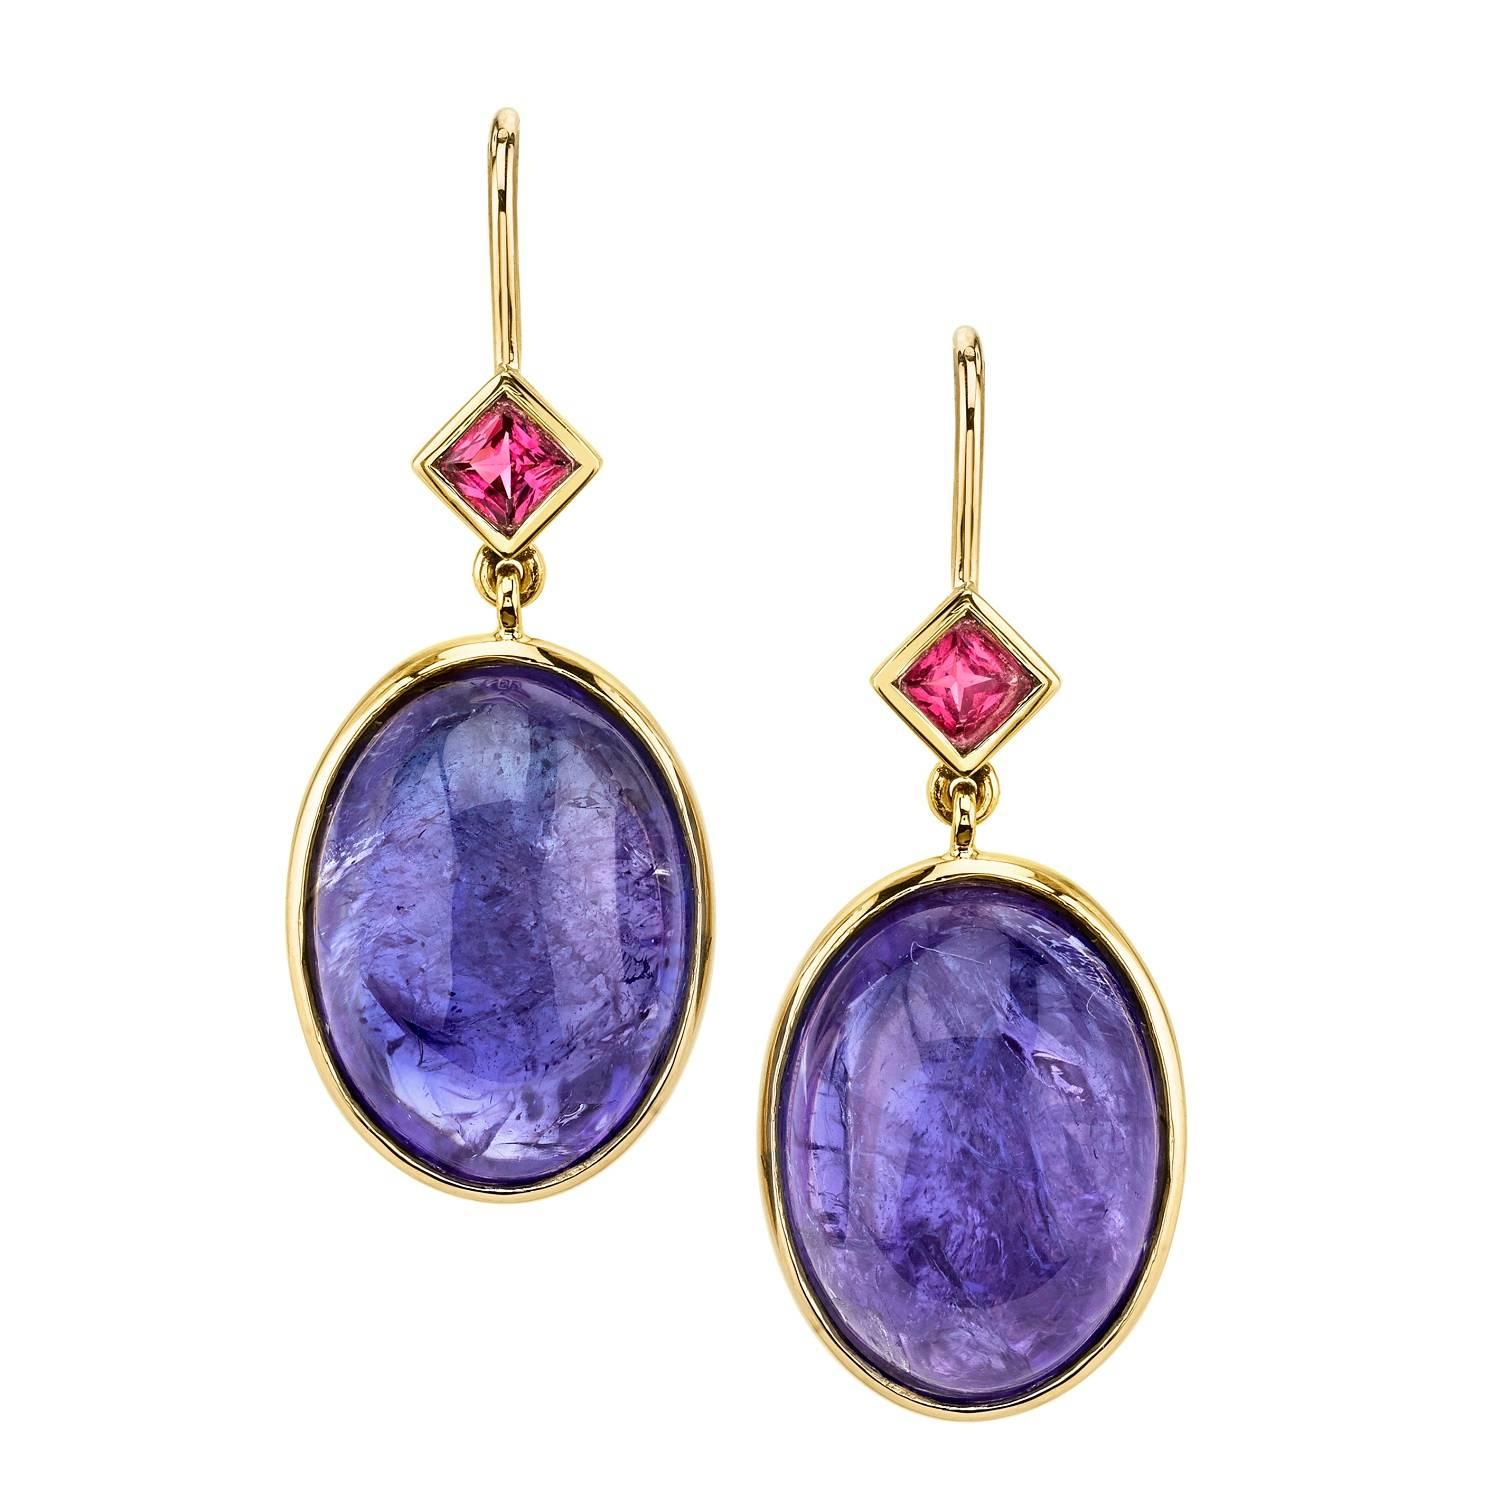 Tanzanite and Spinel Earrings